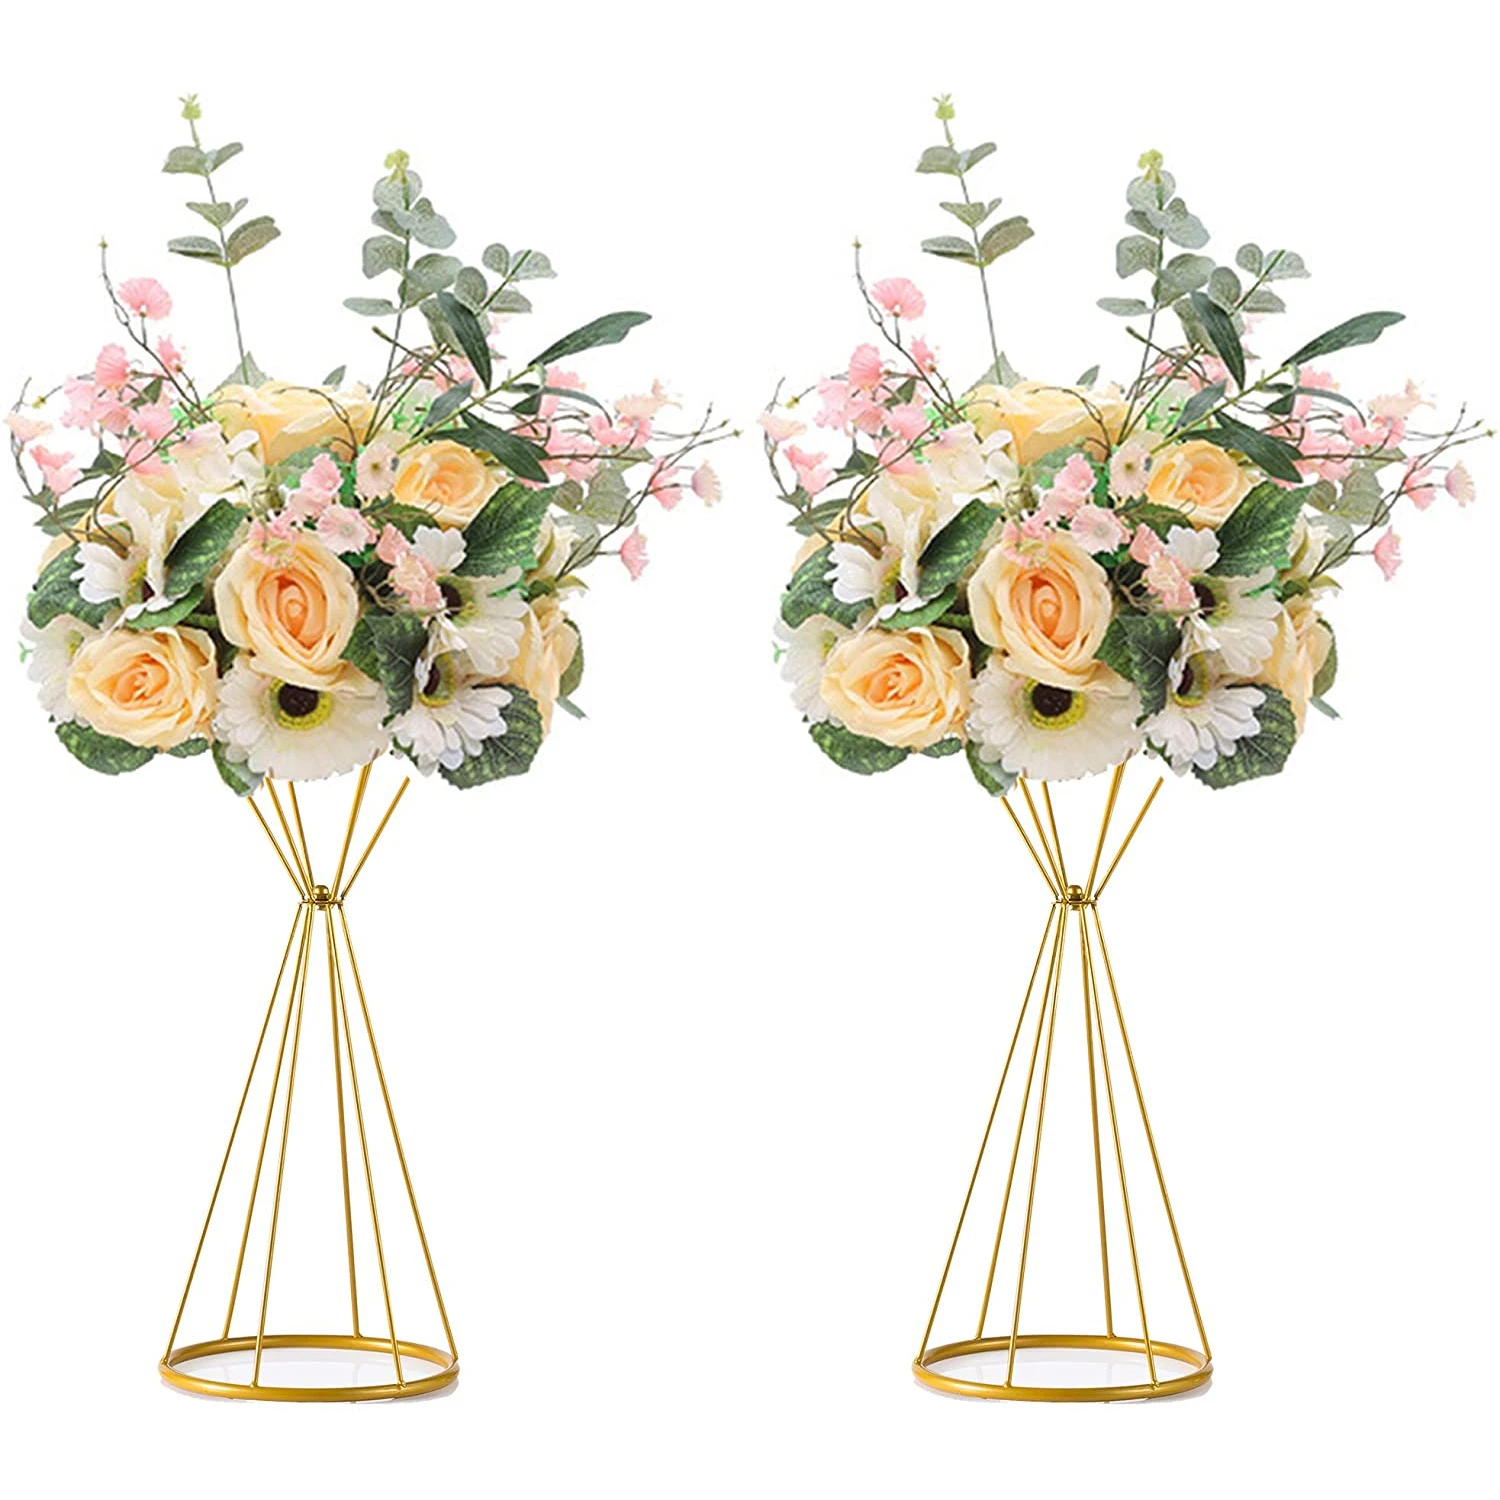 

Gold Centerpieces for Table Wedding Geometric Metal Flower Stands for Centerpiece Tables Metalllic Tall Risers for Tabletop